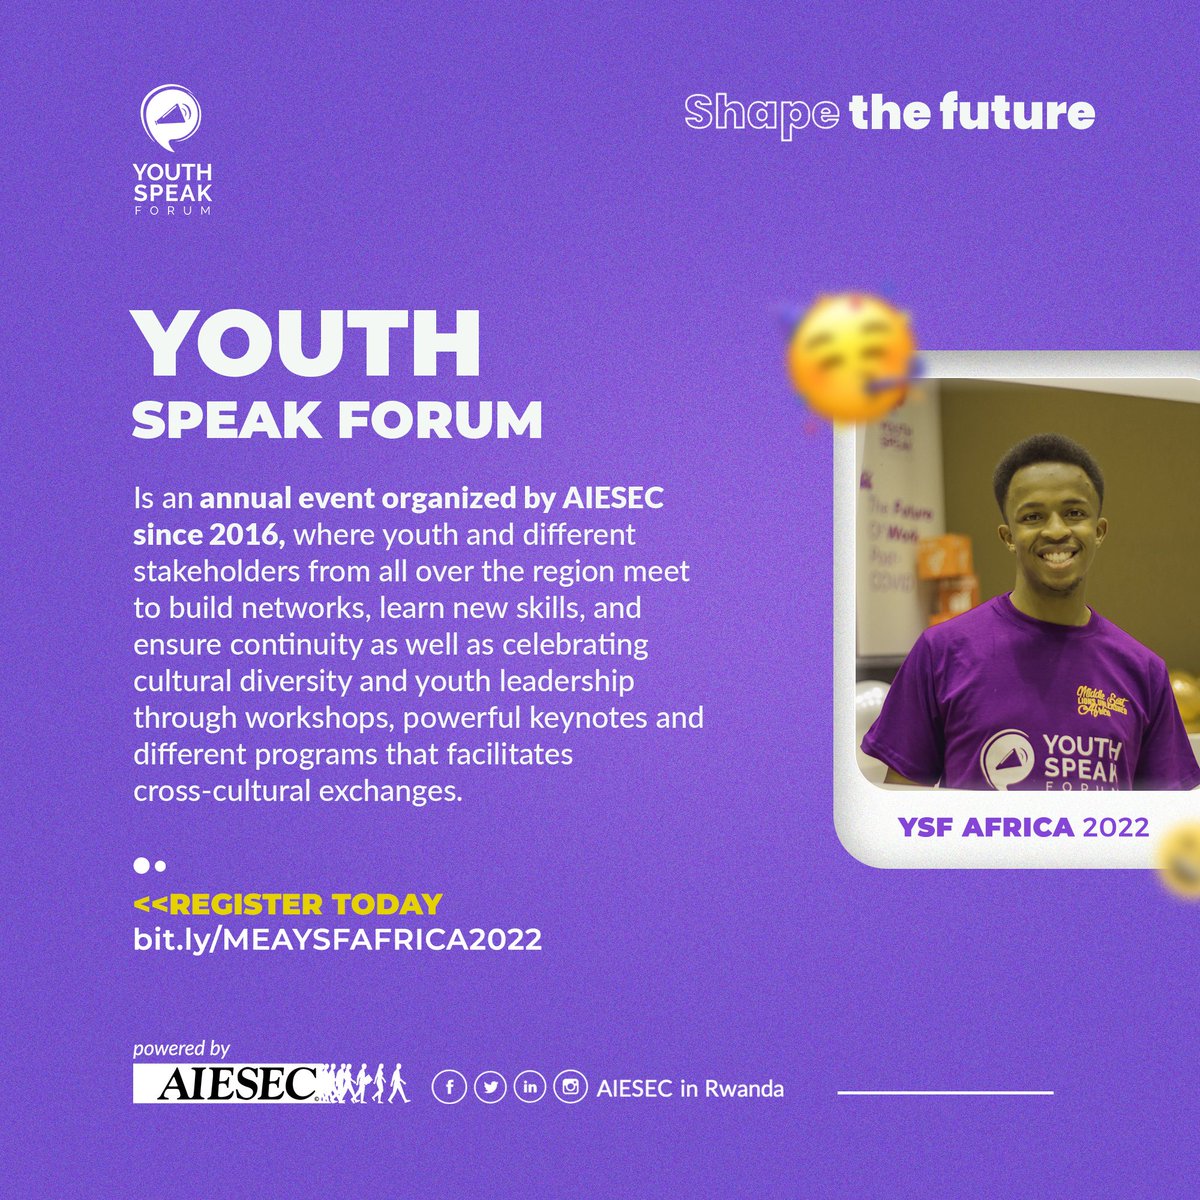 This year's Regional Youth Speak Forum will take place in Rwanda and will welcome more than 500 young people across the region and beyond.

Register now to benefit from such a diverse experience: aiesecinternational.typeform.com/ysfrwanda22

#YSF2022 #ShapeTheFuture #YouthSpeakForum #AIESECinRwanda